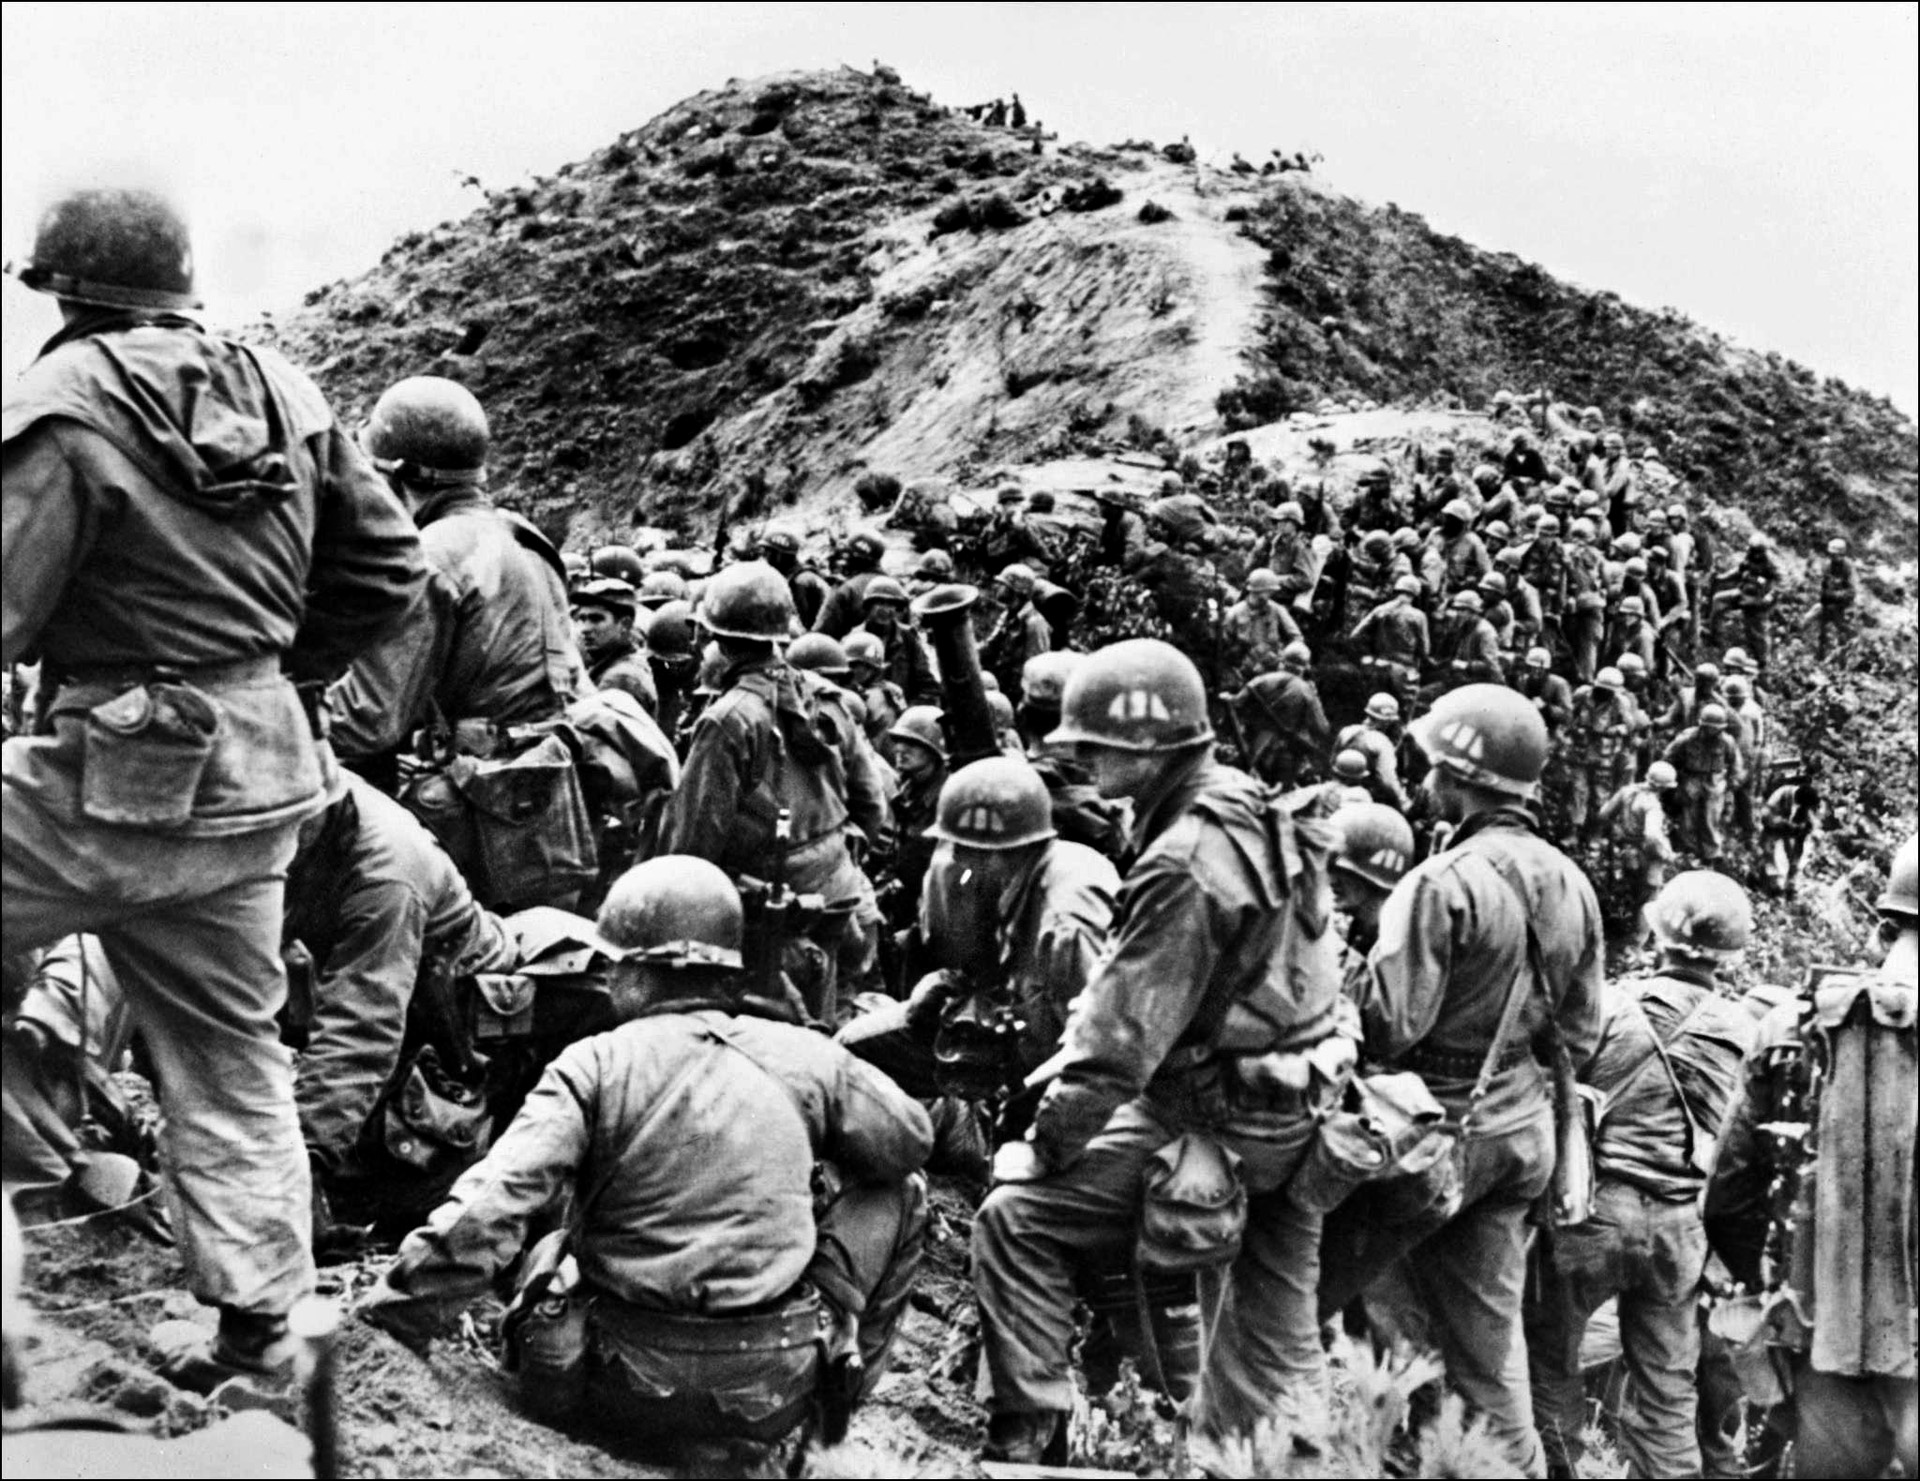 Troops of the U.S. Army's 187th Regimental Combat Team prepare to assault a ridge held by the Chinese in May 1951. By summer 1951 the war had become a stalemate with each side launching new offensives only to influence peace negotiations.